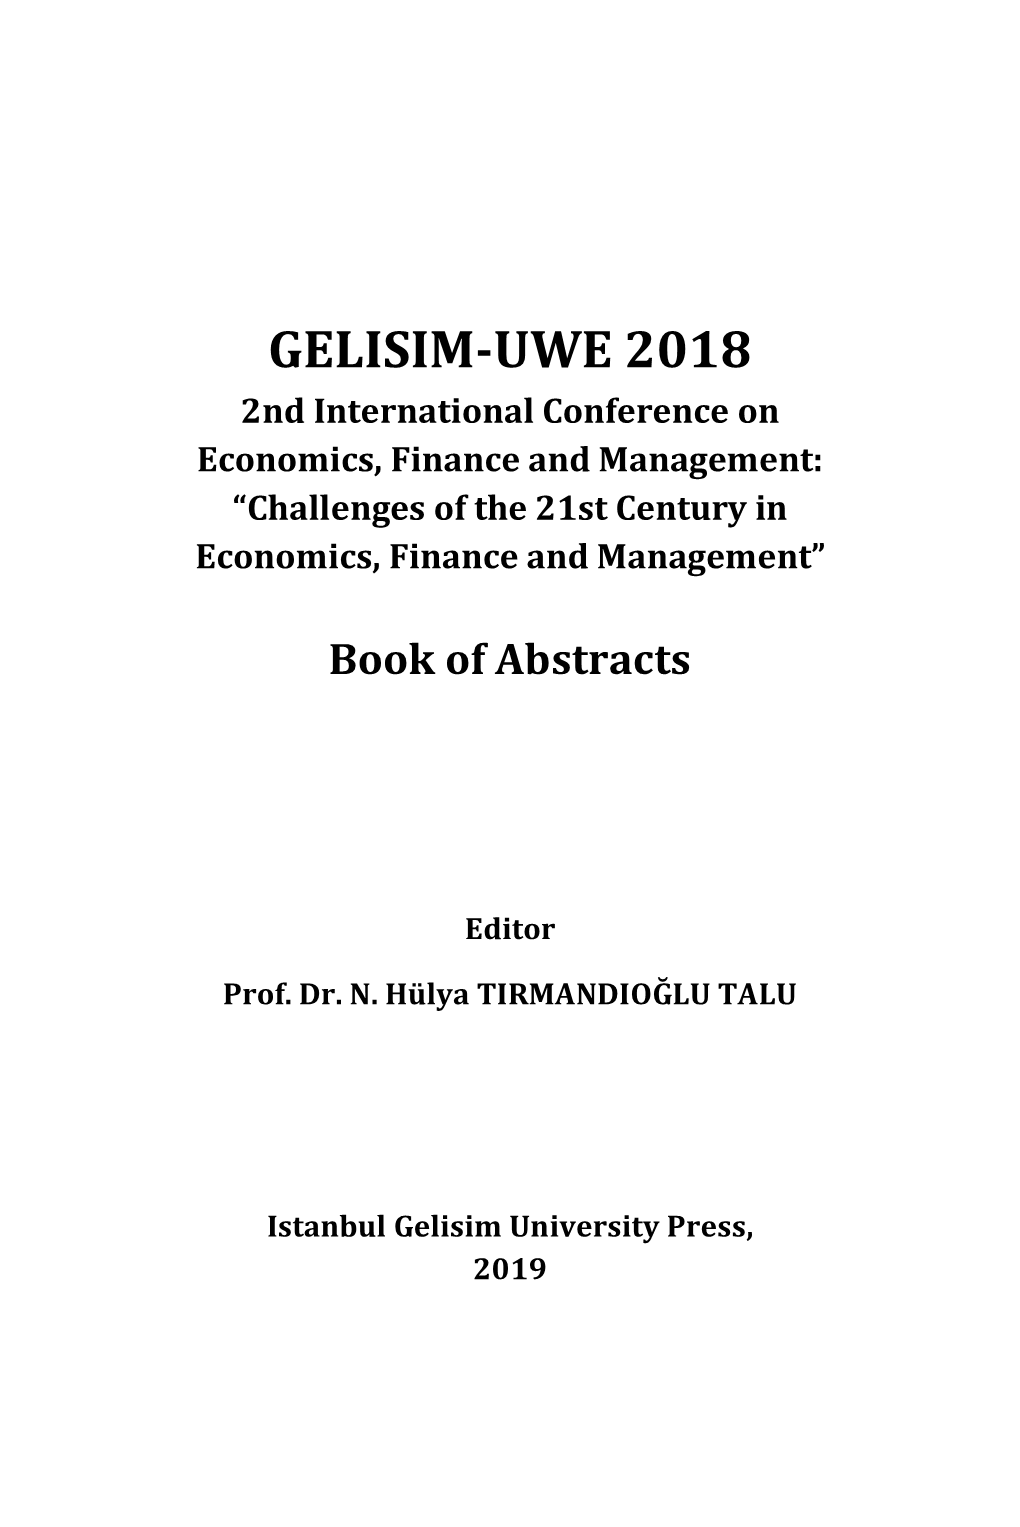 GELISIM-UWE 2018 2Nd International Conference on Economics, Finance and Management: “Challenges of the 21St Century in Economics, Finance and Management”